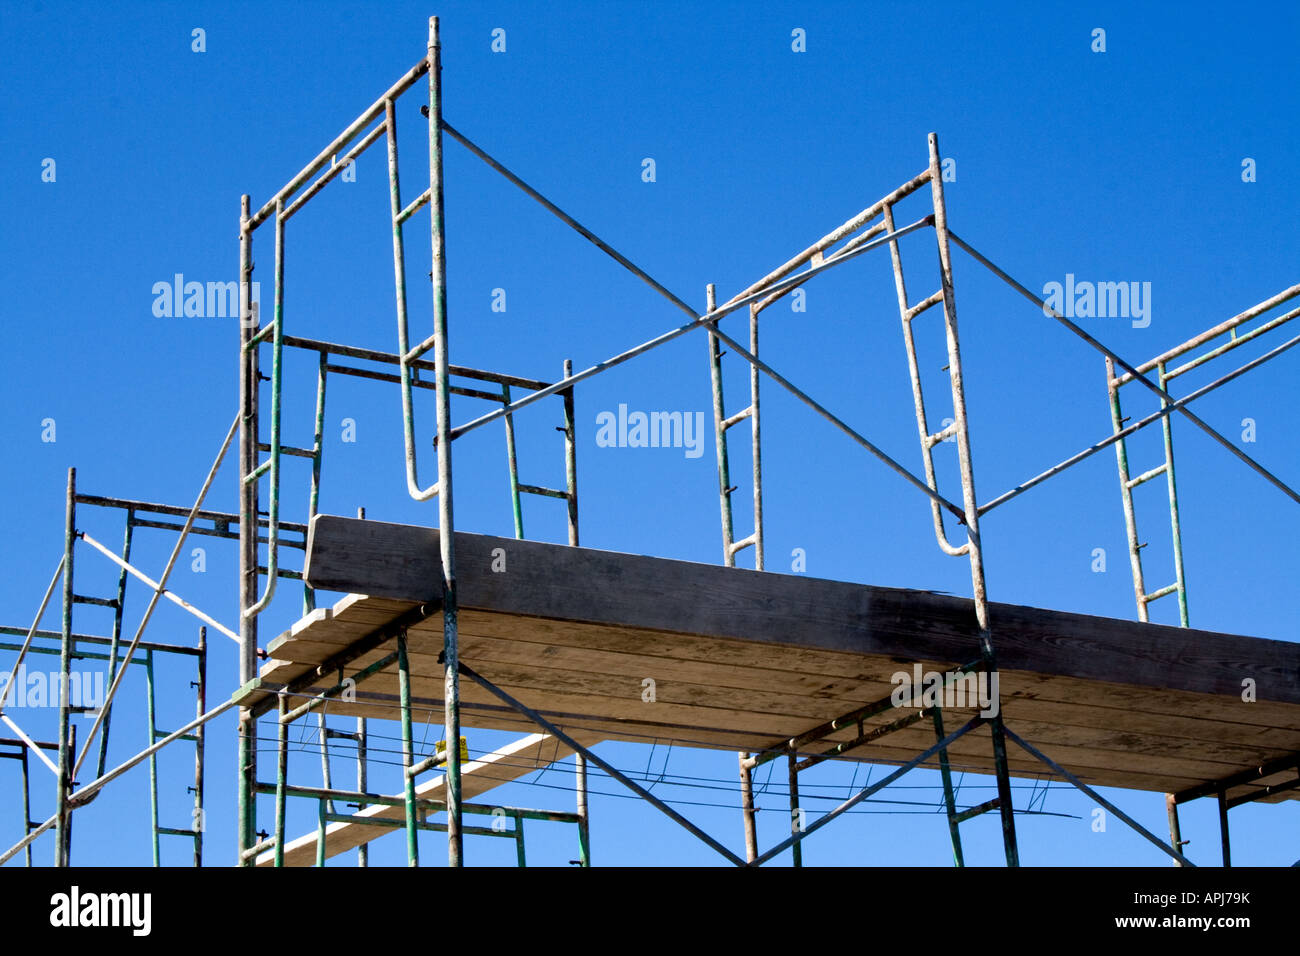 Metal construction scaffold and walkway against a blue sky. Stock Photo